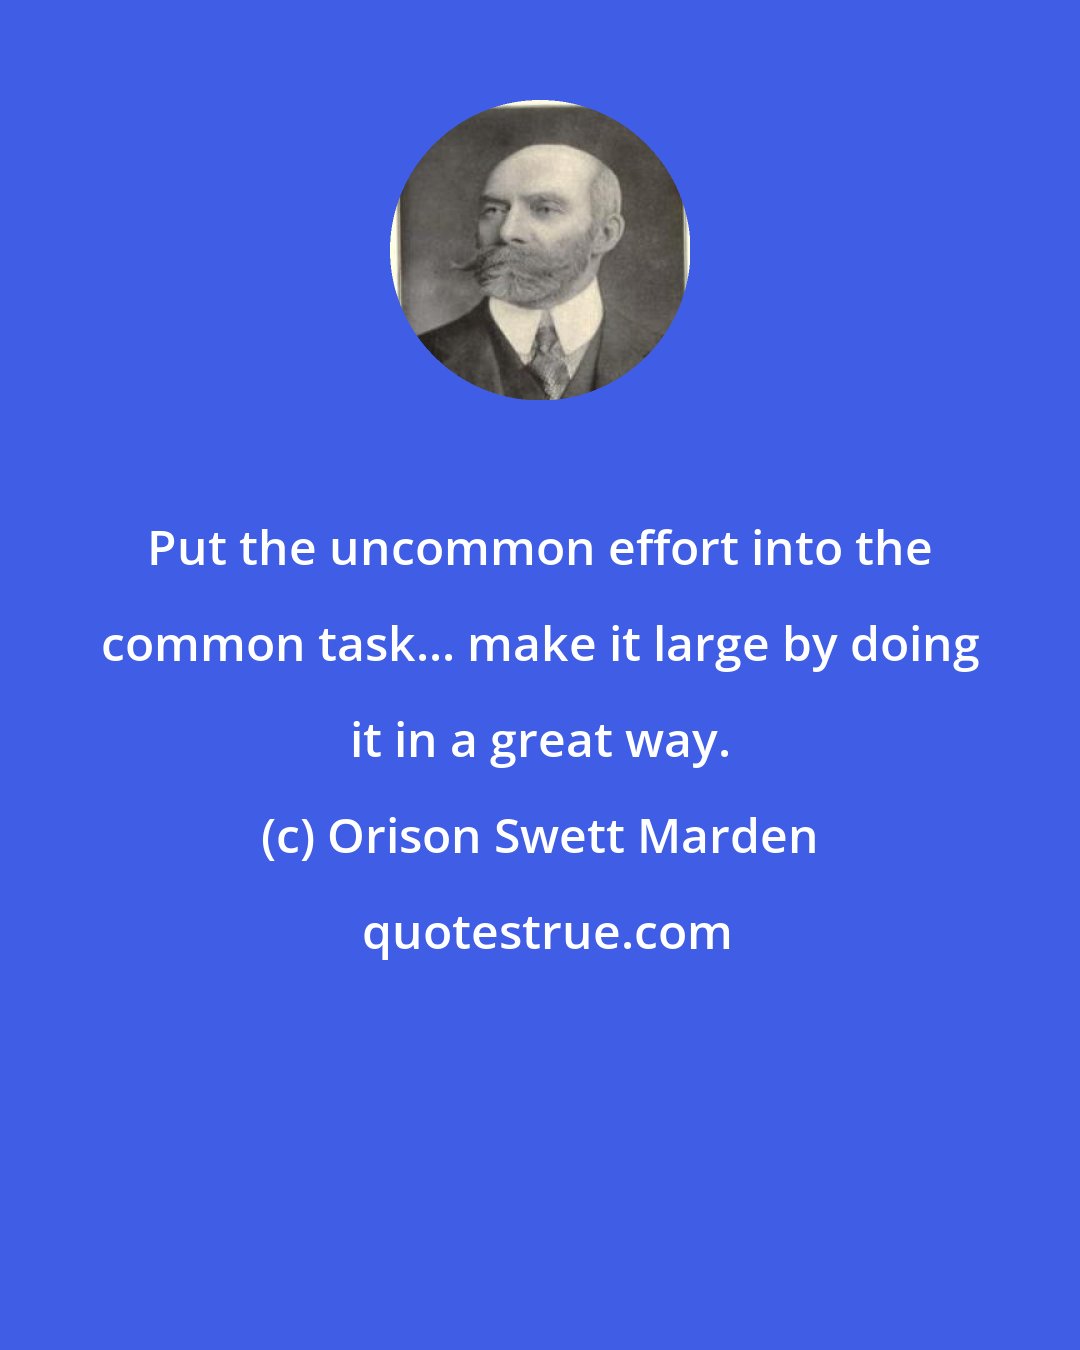 Orison Swett Marden: Put the uncommon effort into the common task... make it large by doing it in a great way.